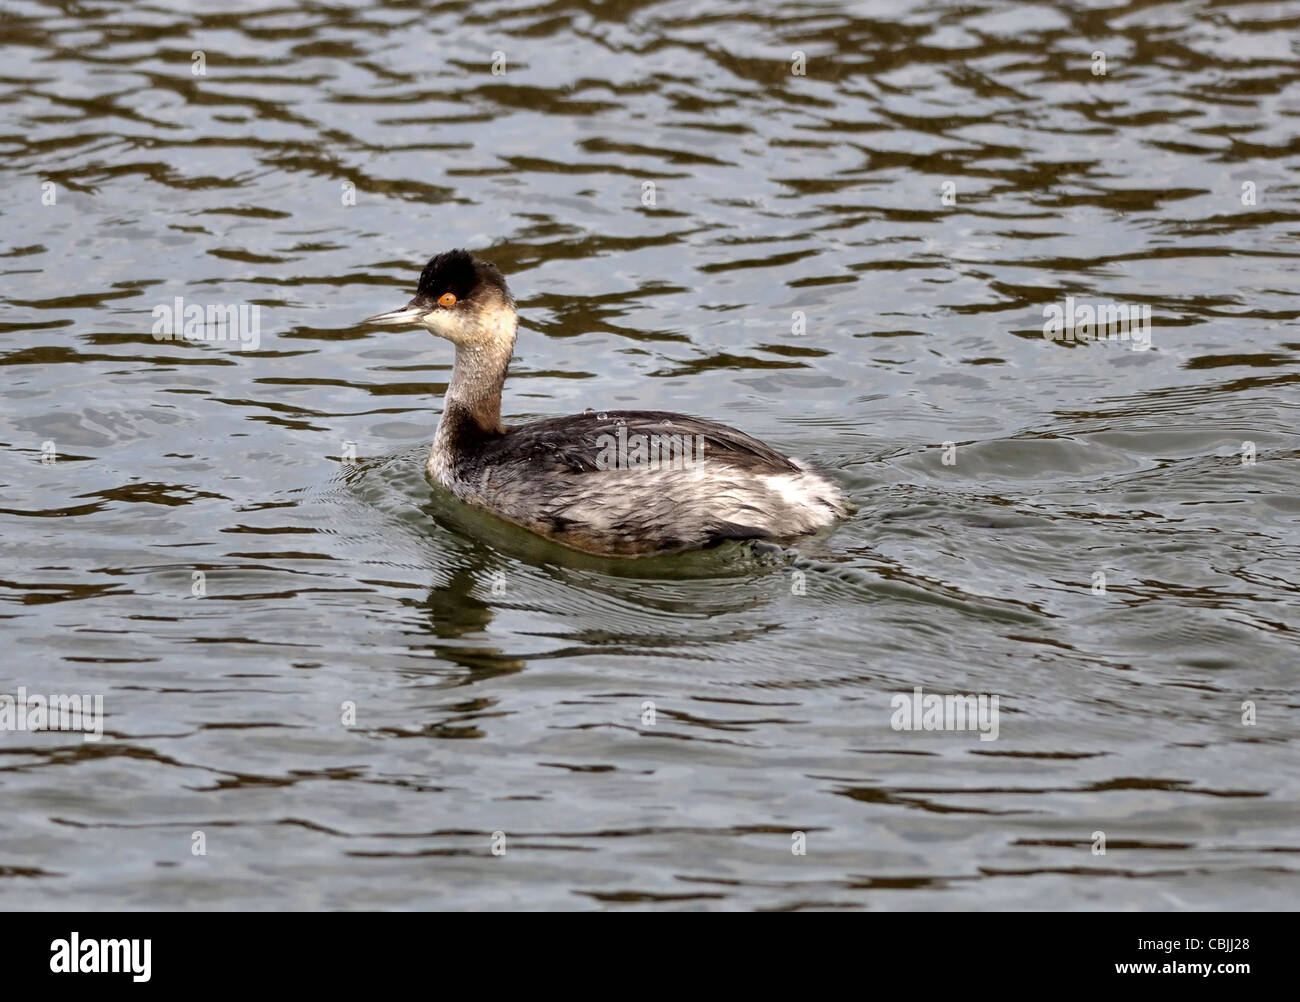 A Eared Grebe duck  (Podiceps nigricollis) seen here on the water. Stock Photo